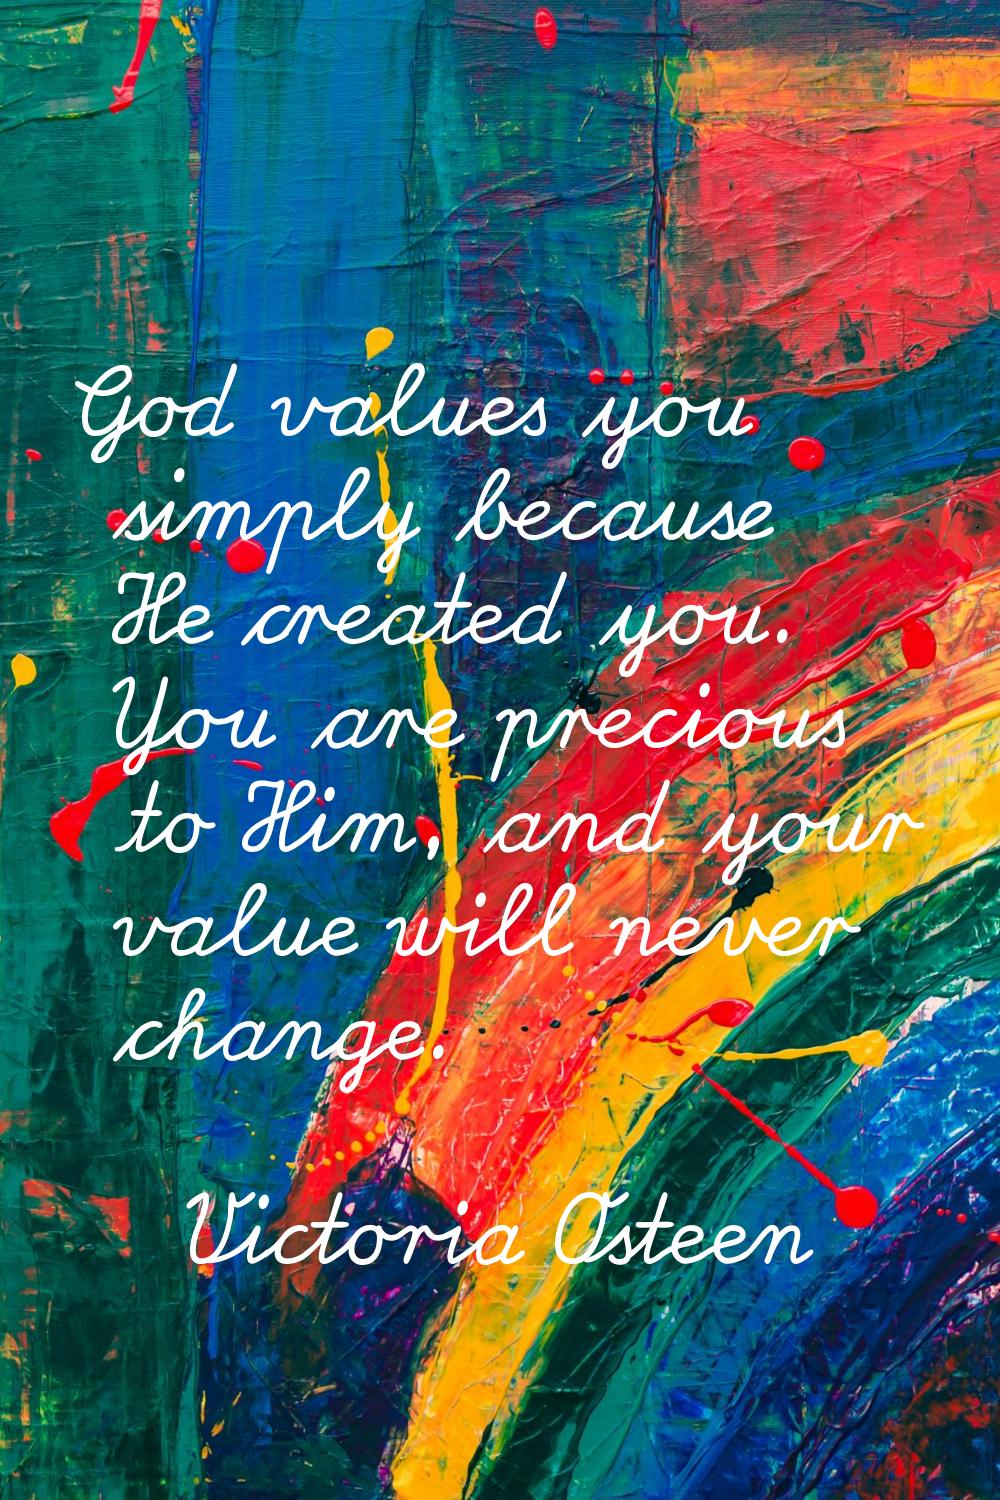 God values you simply because He created you. You are precious to Him, and your value will never ch